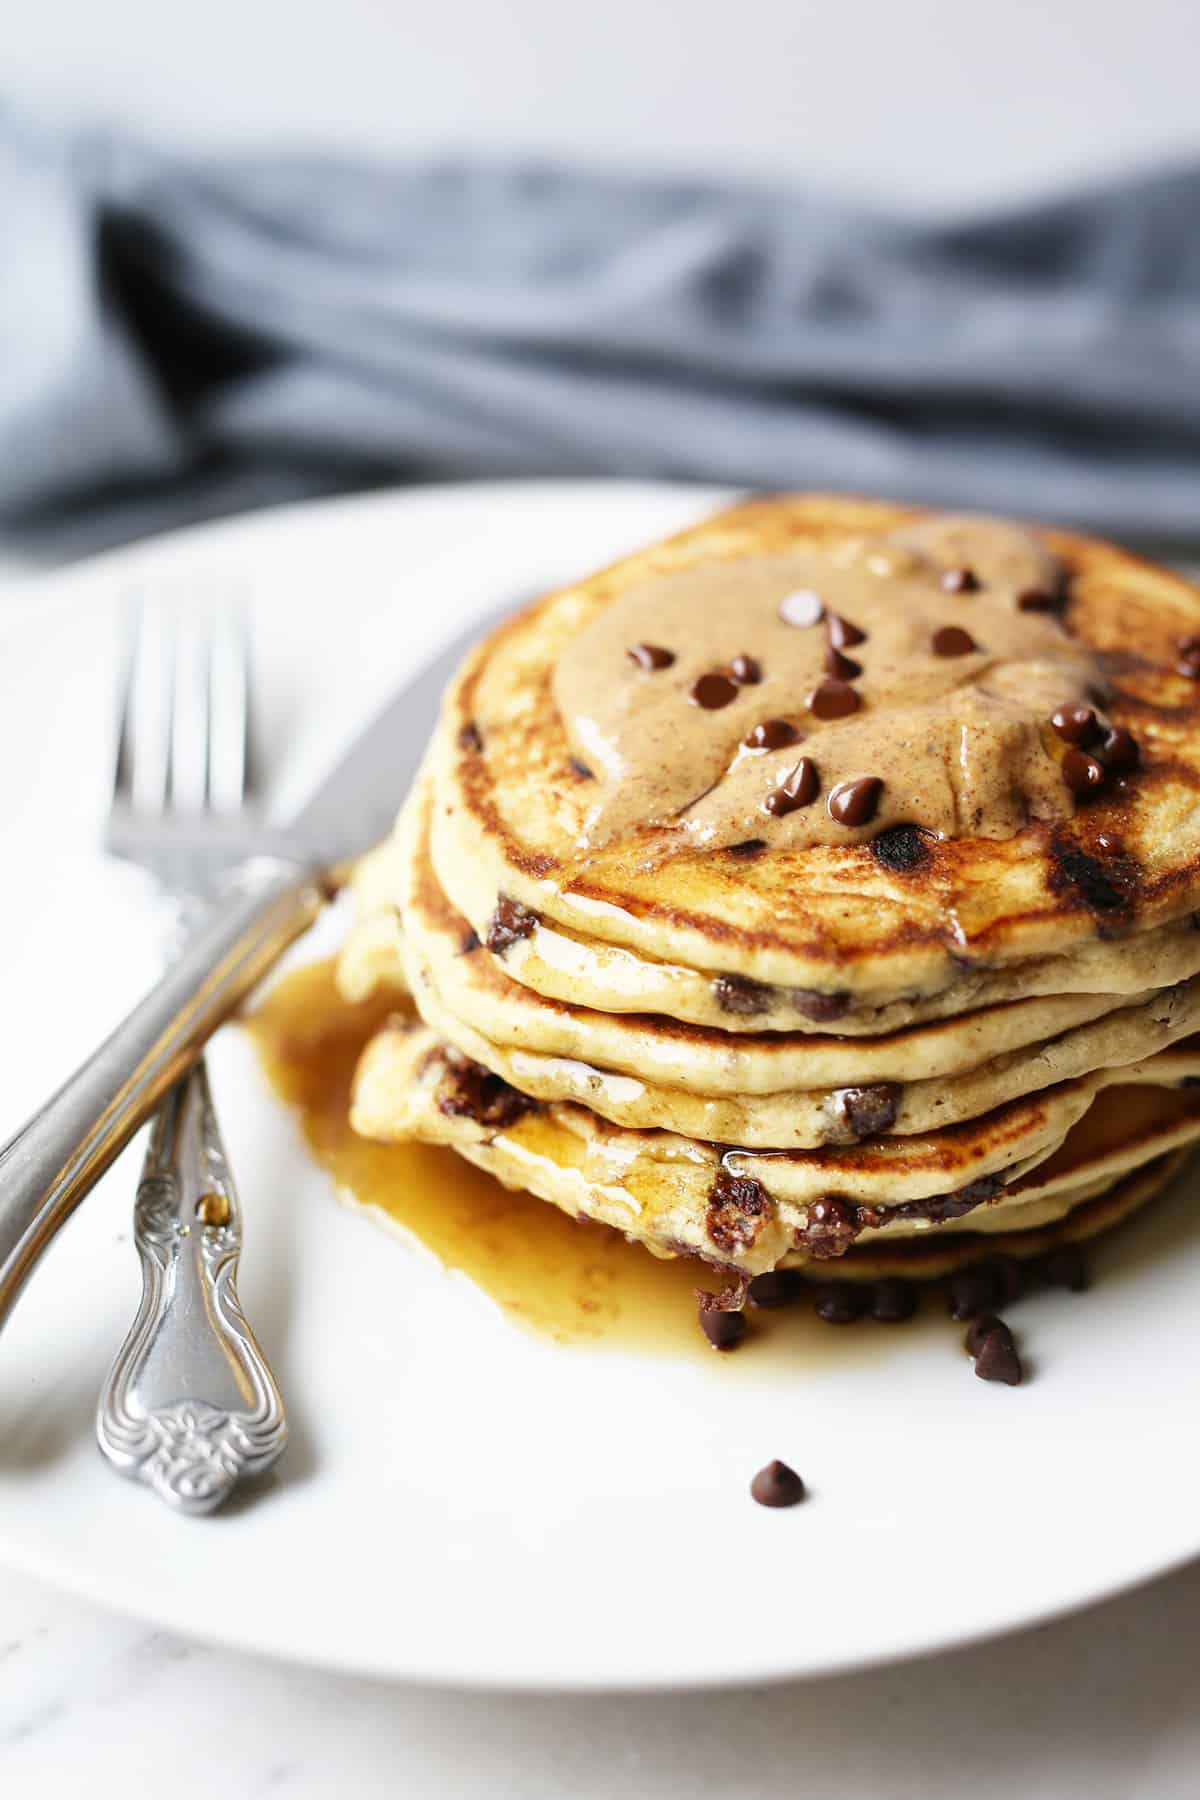 Best Homemade Chocolate Chip Pancakes Ever! Soft, Vegan and gluten free, quick and easy to make, freezer friendly, healthy and totally delicious!